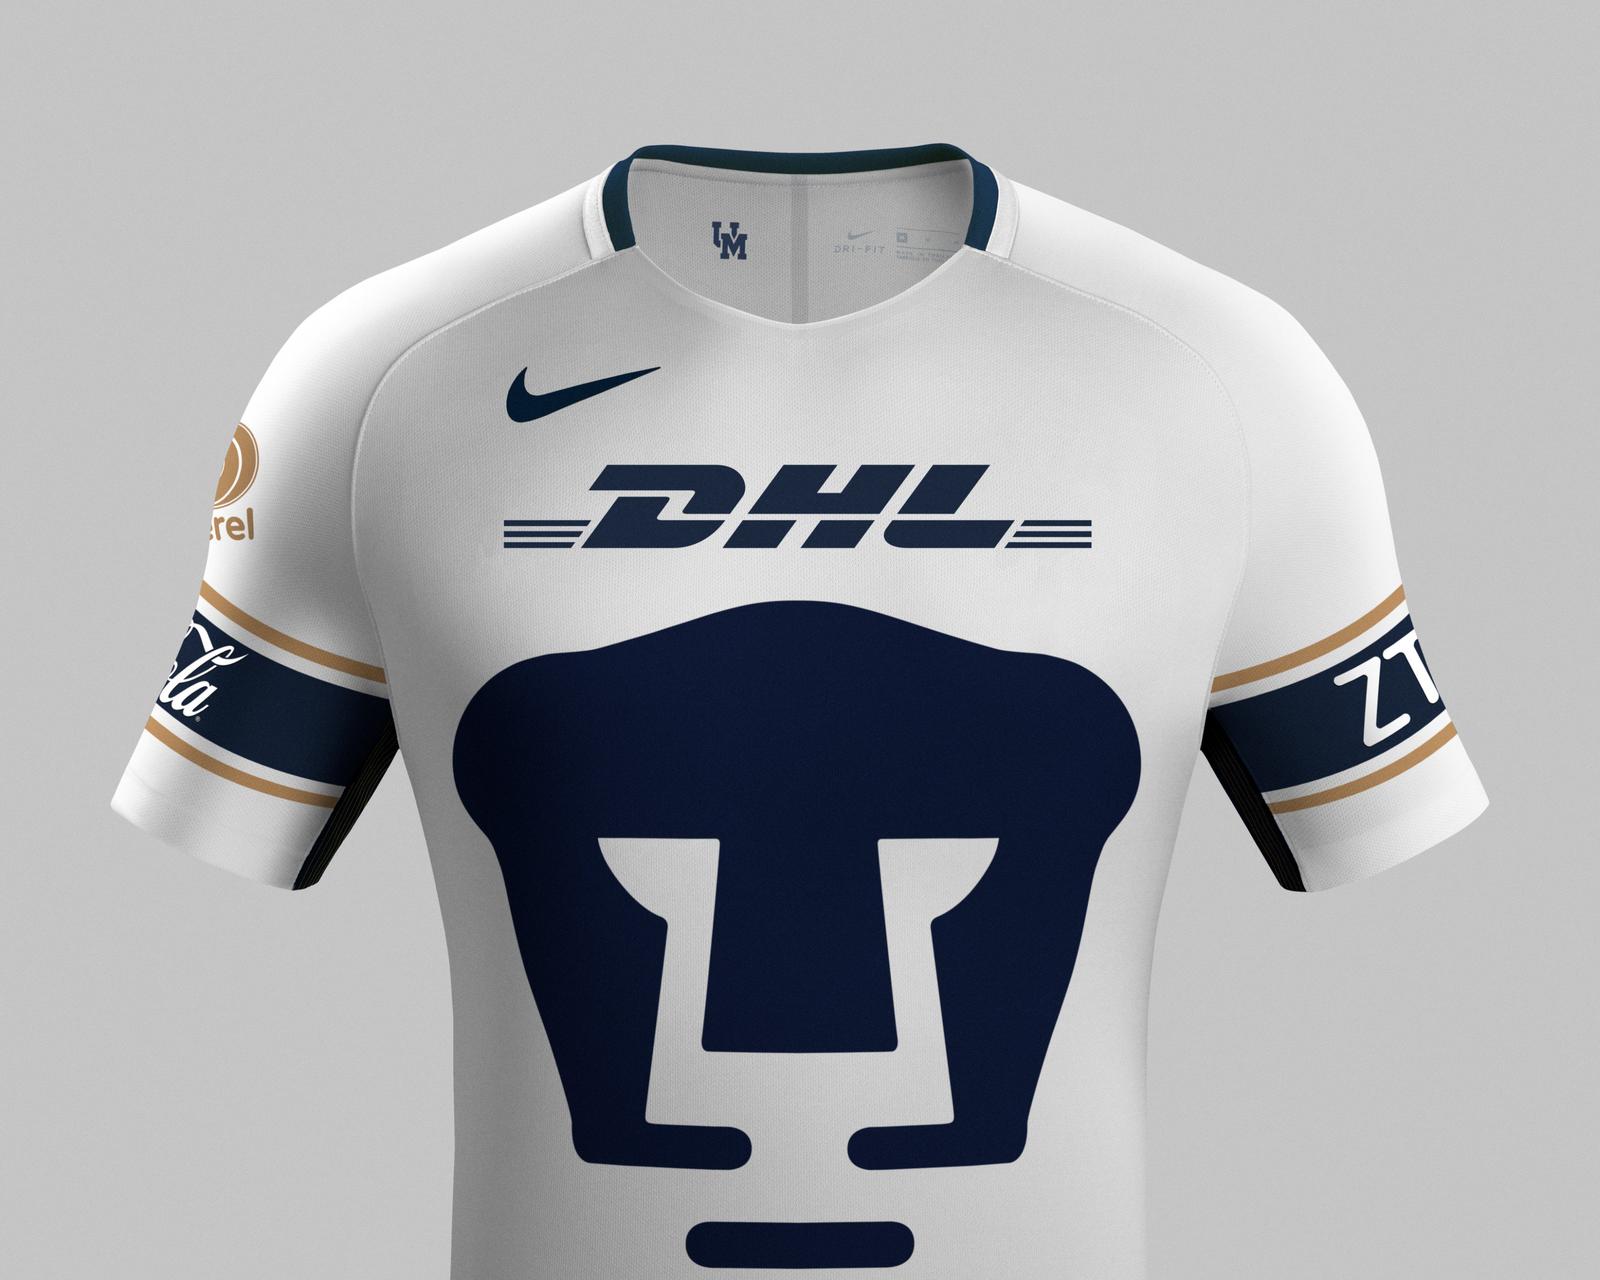 Outstanding Pumas UNAM 17-18 Home and Away Kits Revealed - Footy Headlines